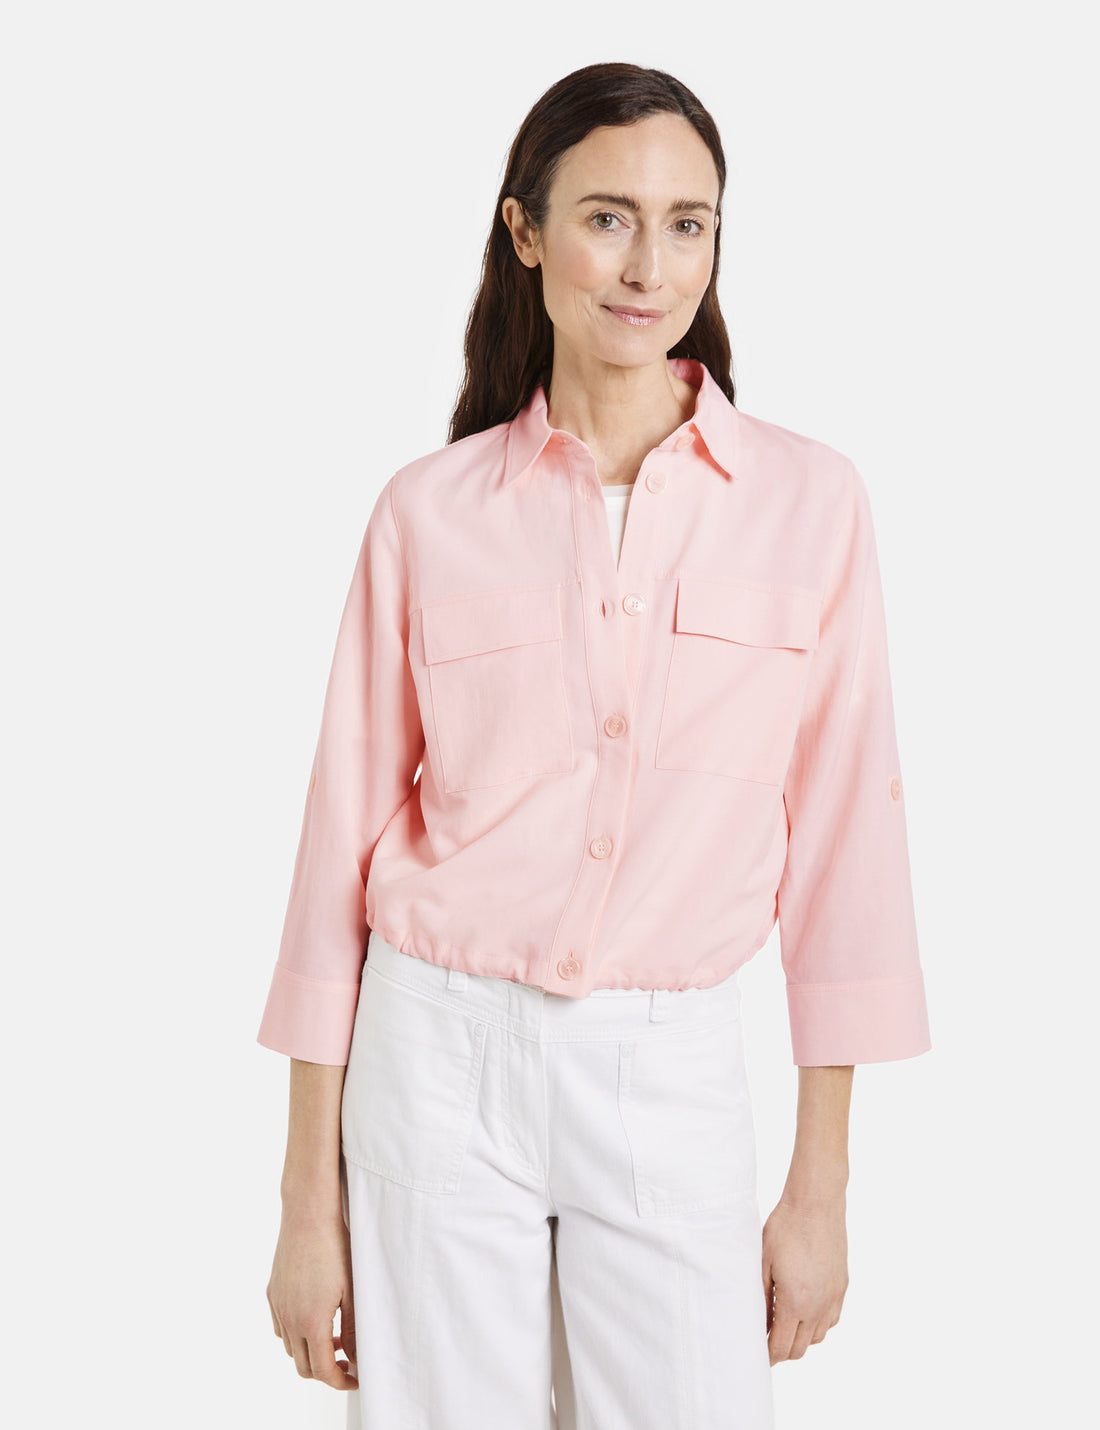 Short Blouse With An Elasticated Drawstring_260030-66233_30915_01